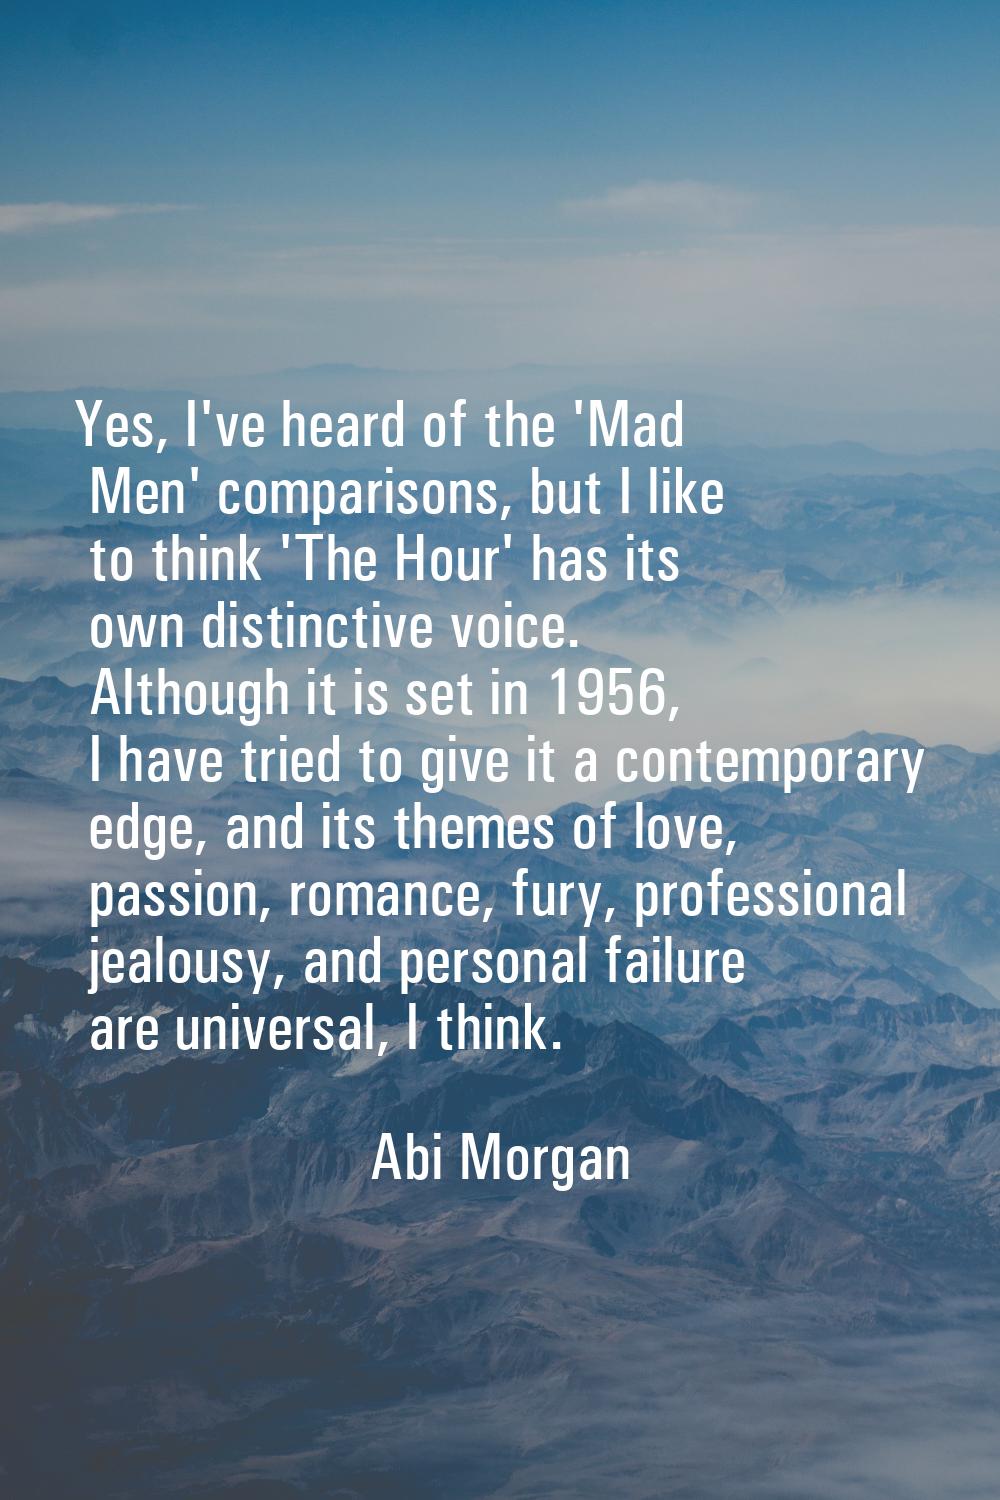 Yes, I've heard of the 'Mad Men' comparisons, but I like to think 'The Hour' has its own distinctiv